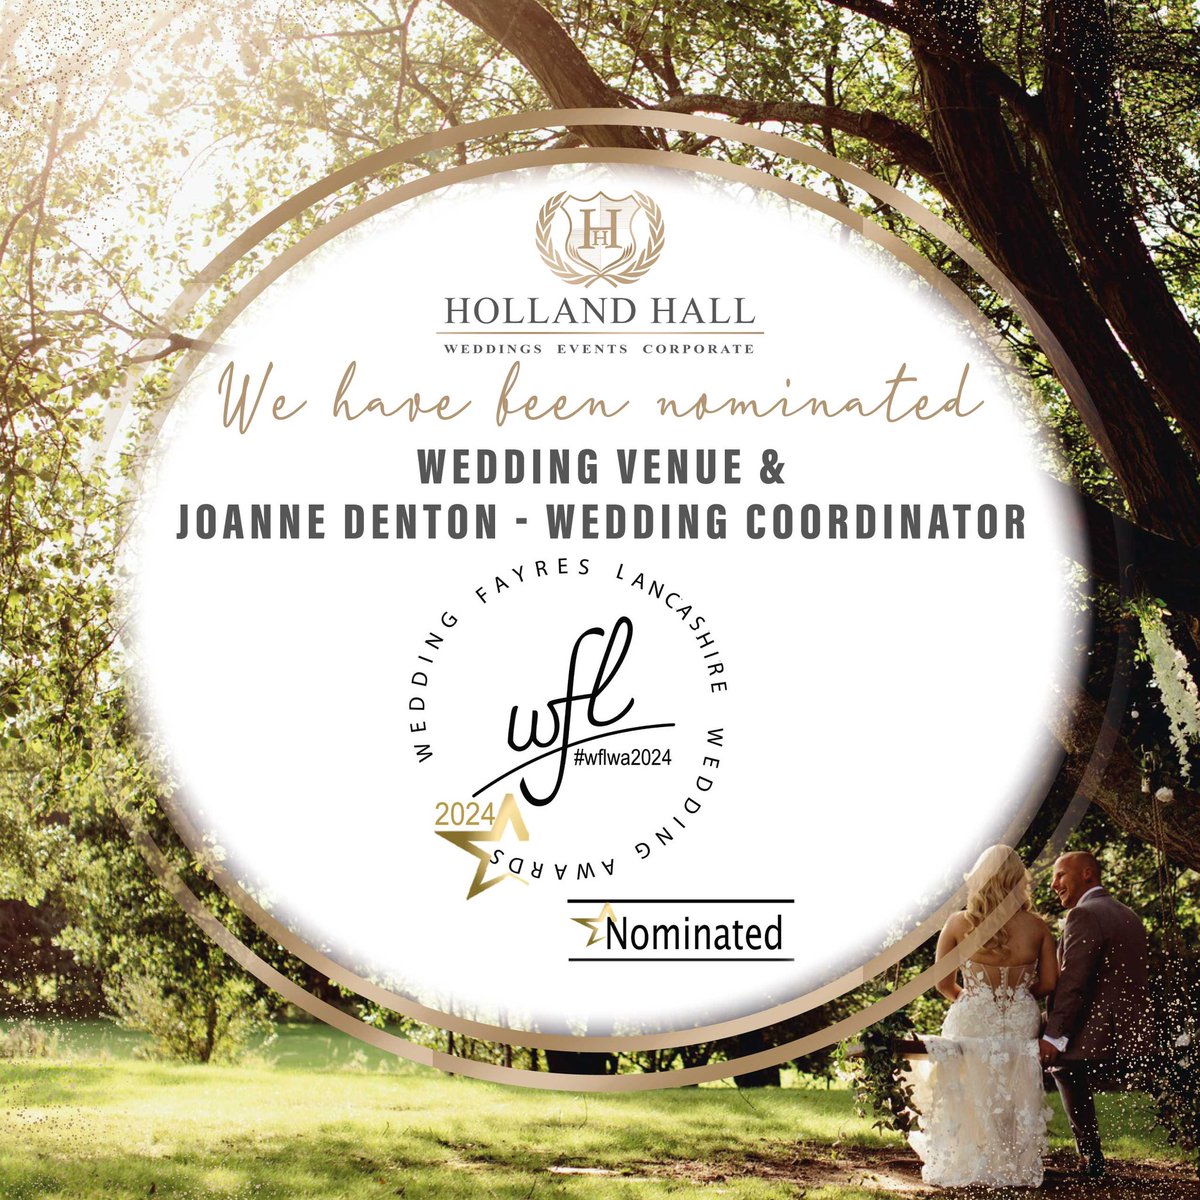 We have been nominated at the Wedding Fayre Lancashire Awards! In not one but two categories! 🙌🏻🤩❤️

✨ Wedding Venue
✨ Wedding Coordinator - Joanne Denton

weddingfayreslancashire.co.uk/wedding-awards

#nominations #awardwinning #lancashirewedding
#weddingawards #DreamVenue #Love  #Celebration